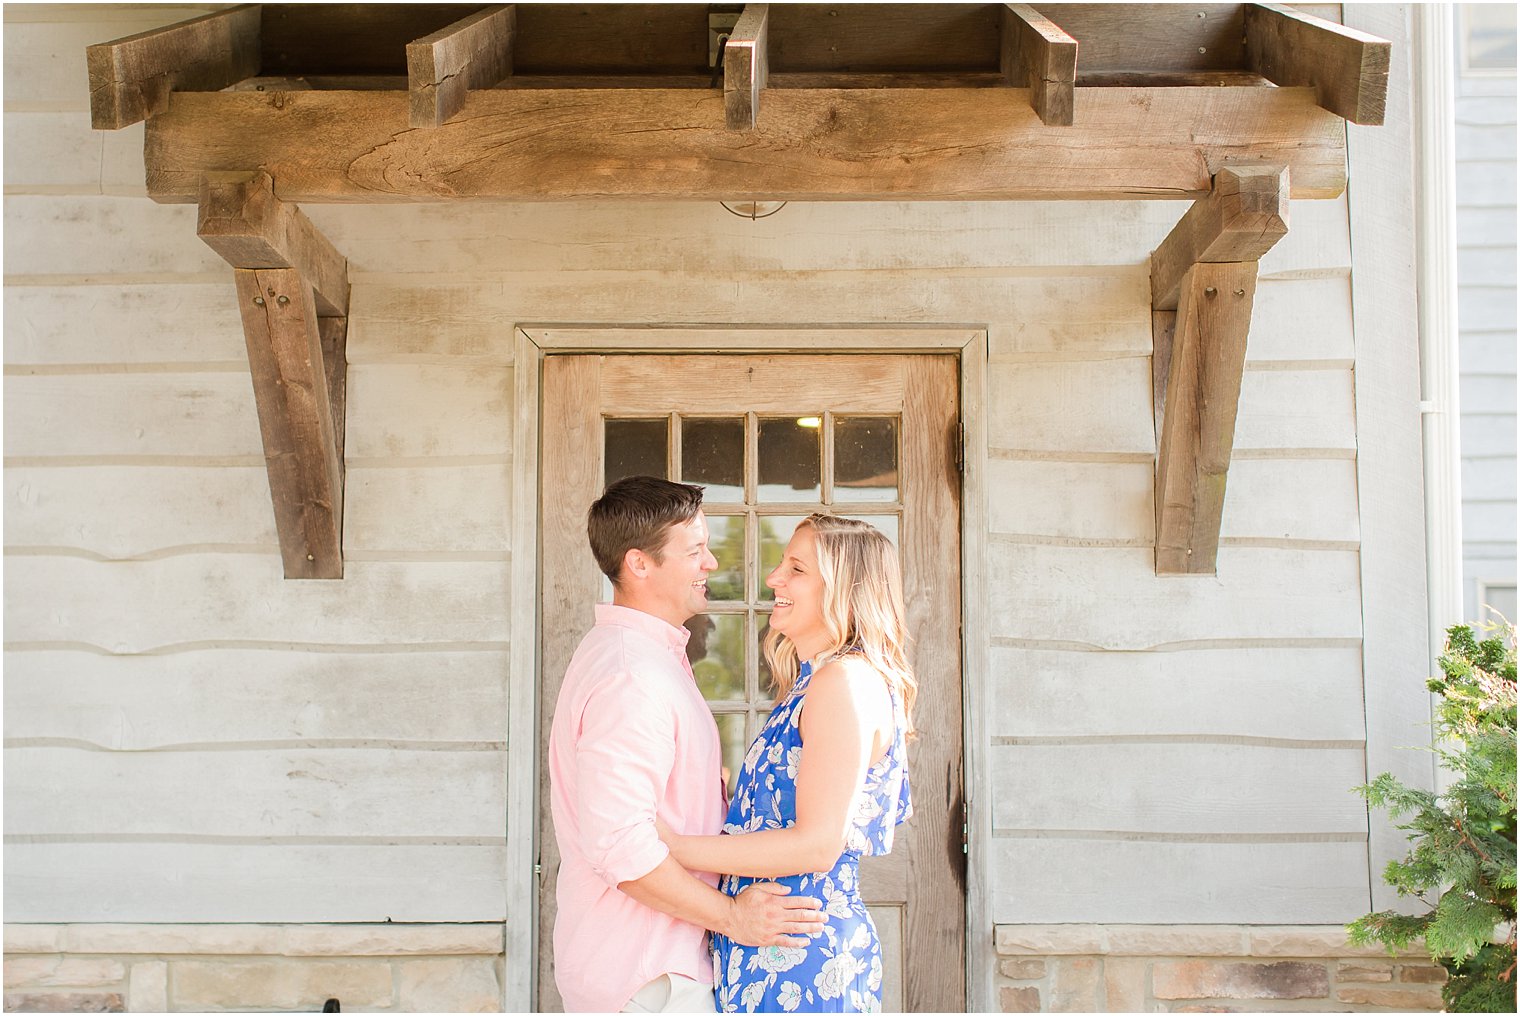 Rustic outdoor engagement session at Laurita Winery in New Egypt NJ 